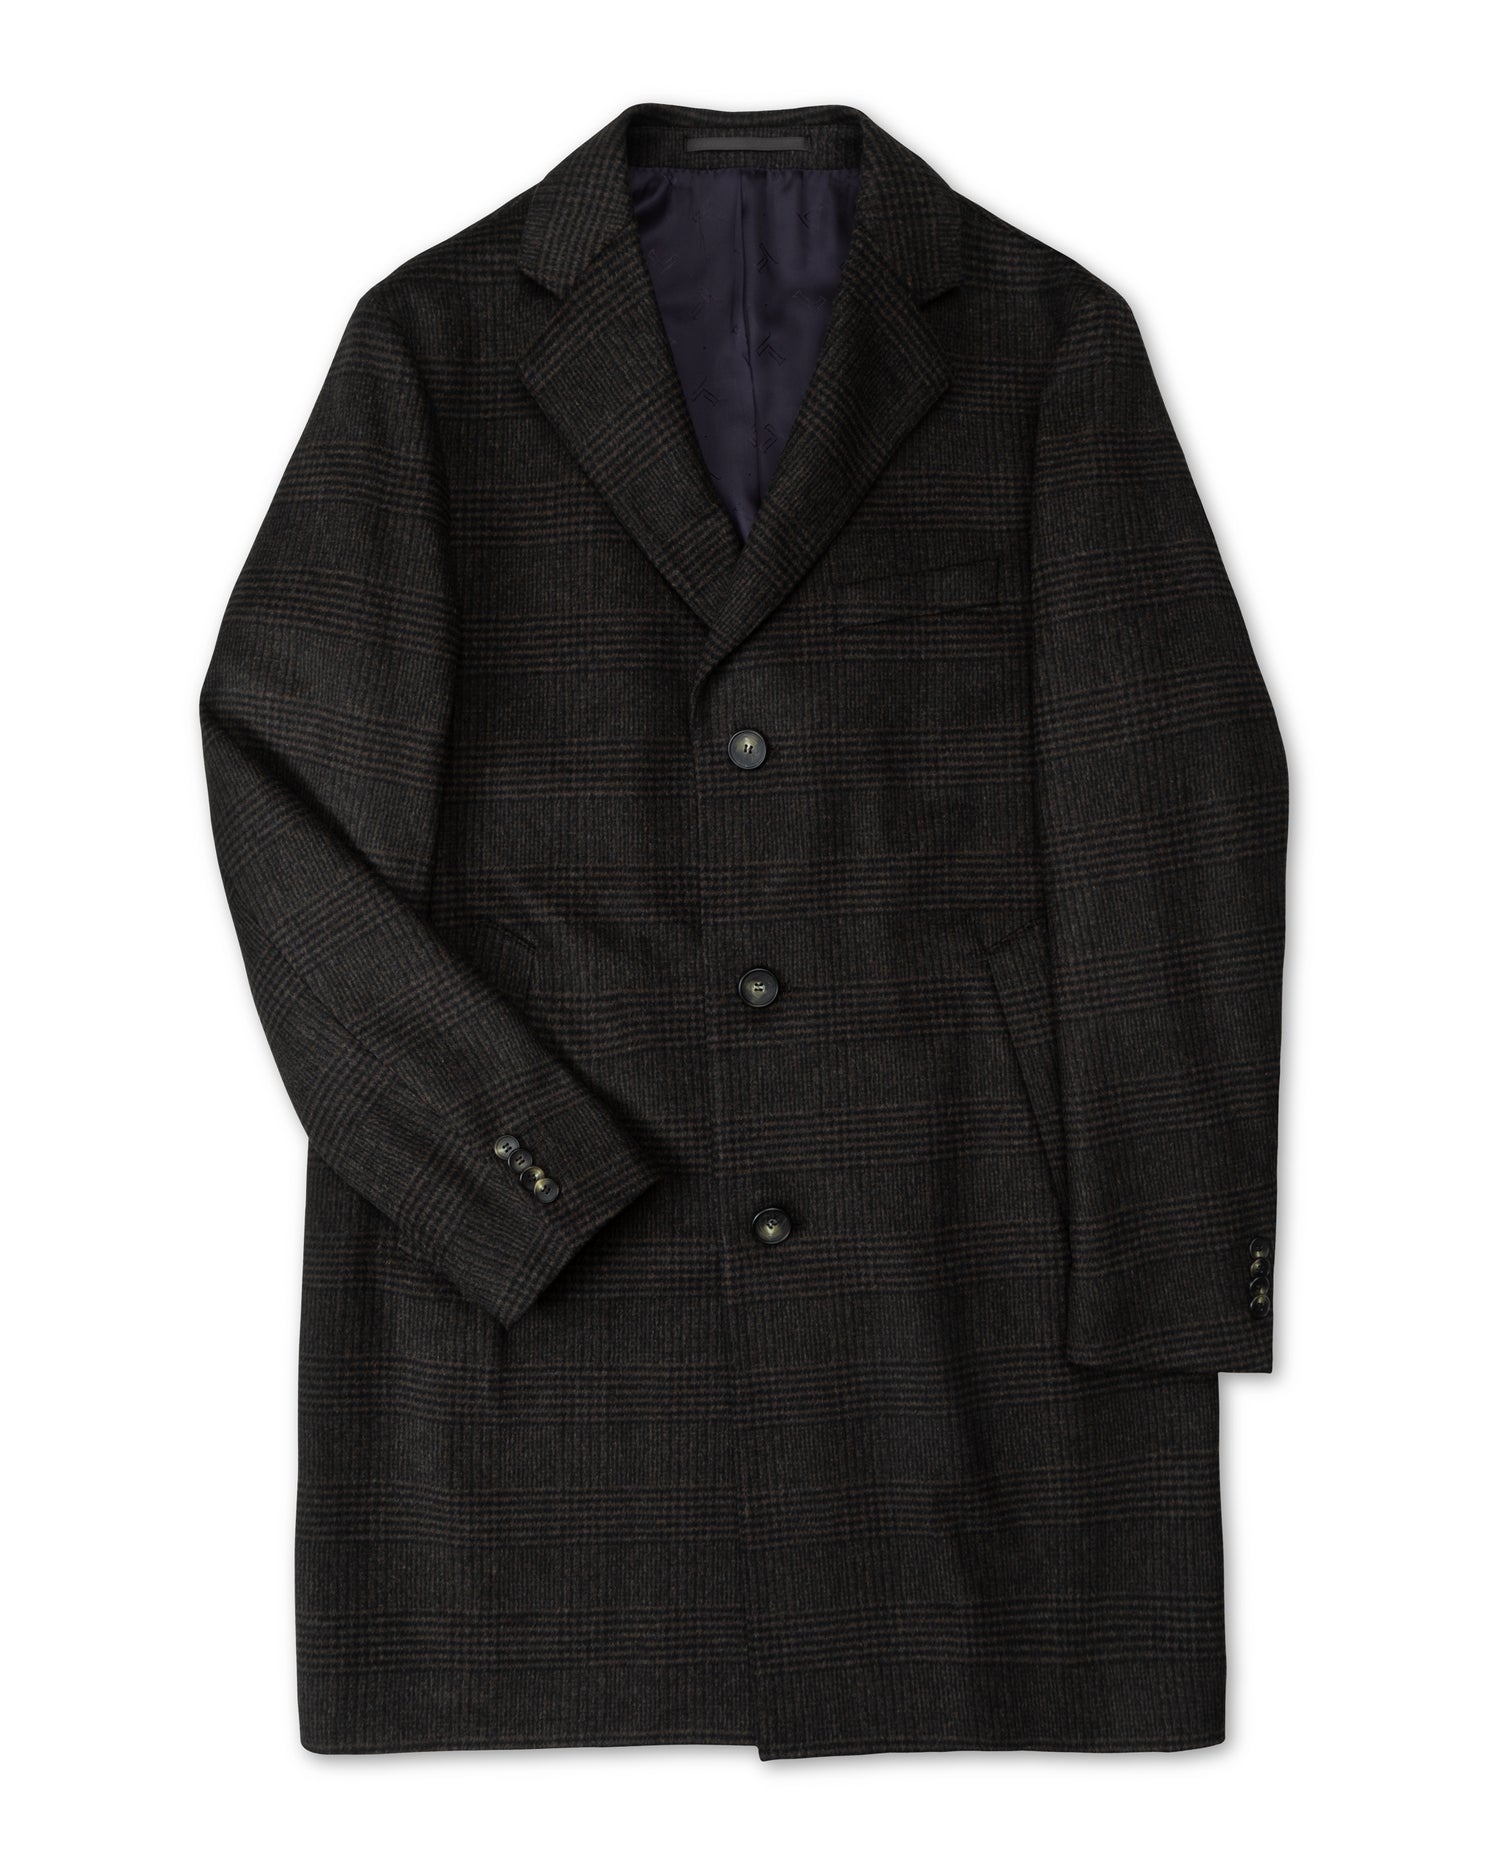 Slim fit Overcoat in Brown Check Fortuny Wool-Cashmere Blend (8464784654666)